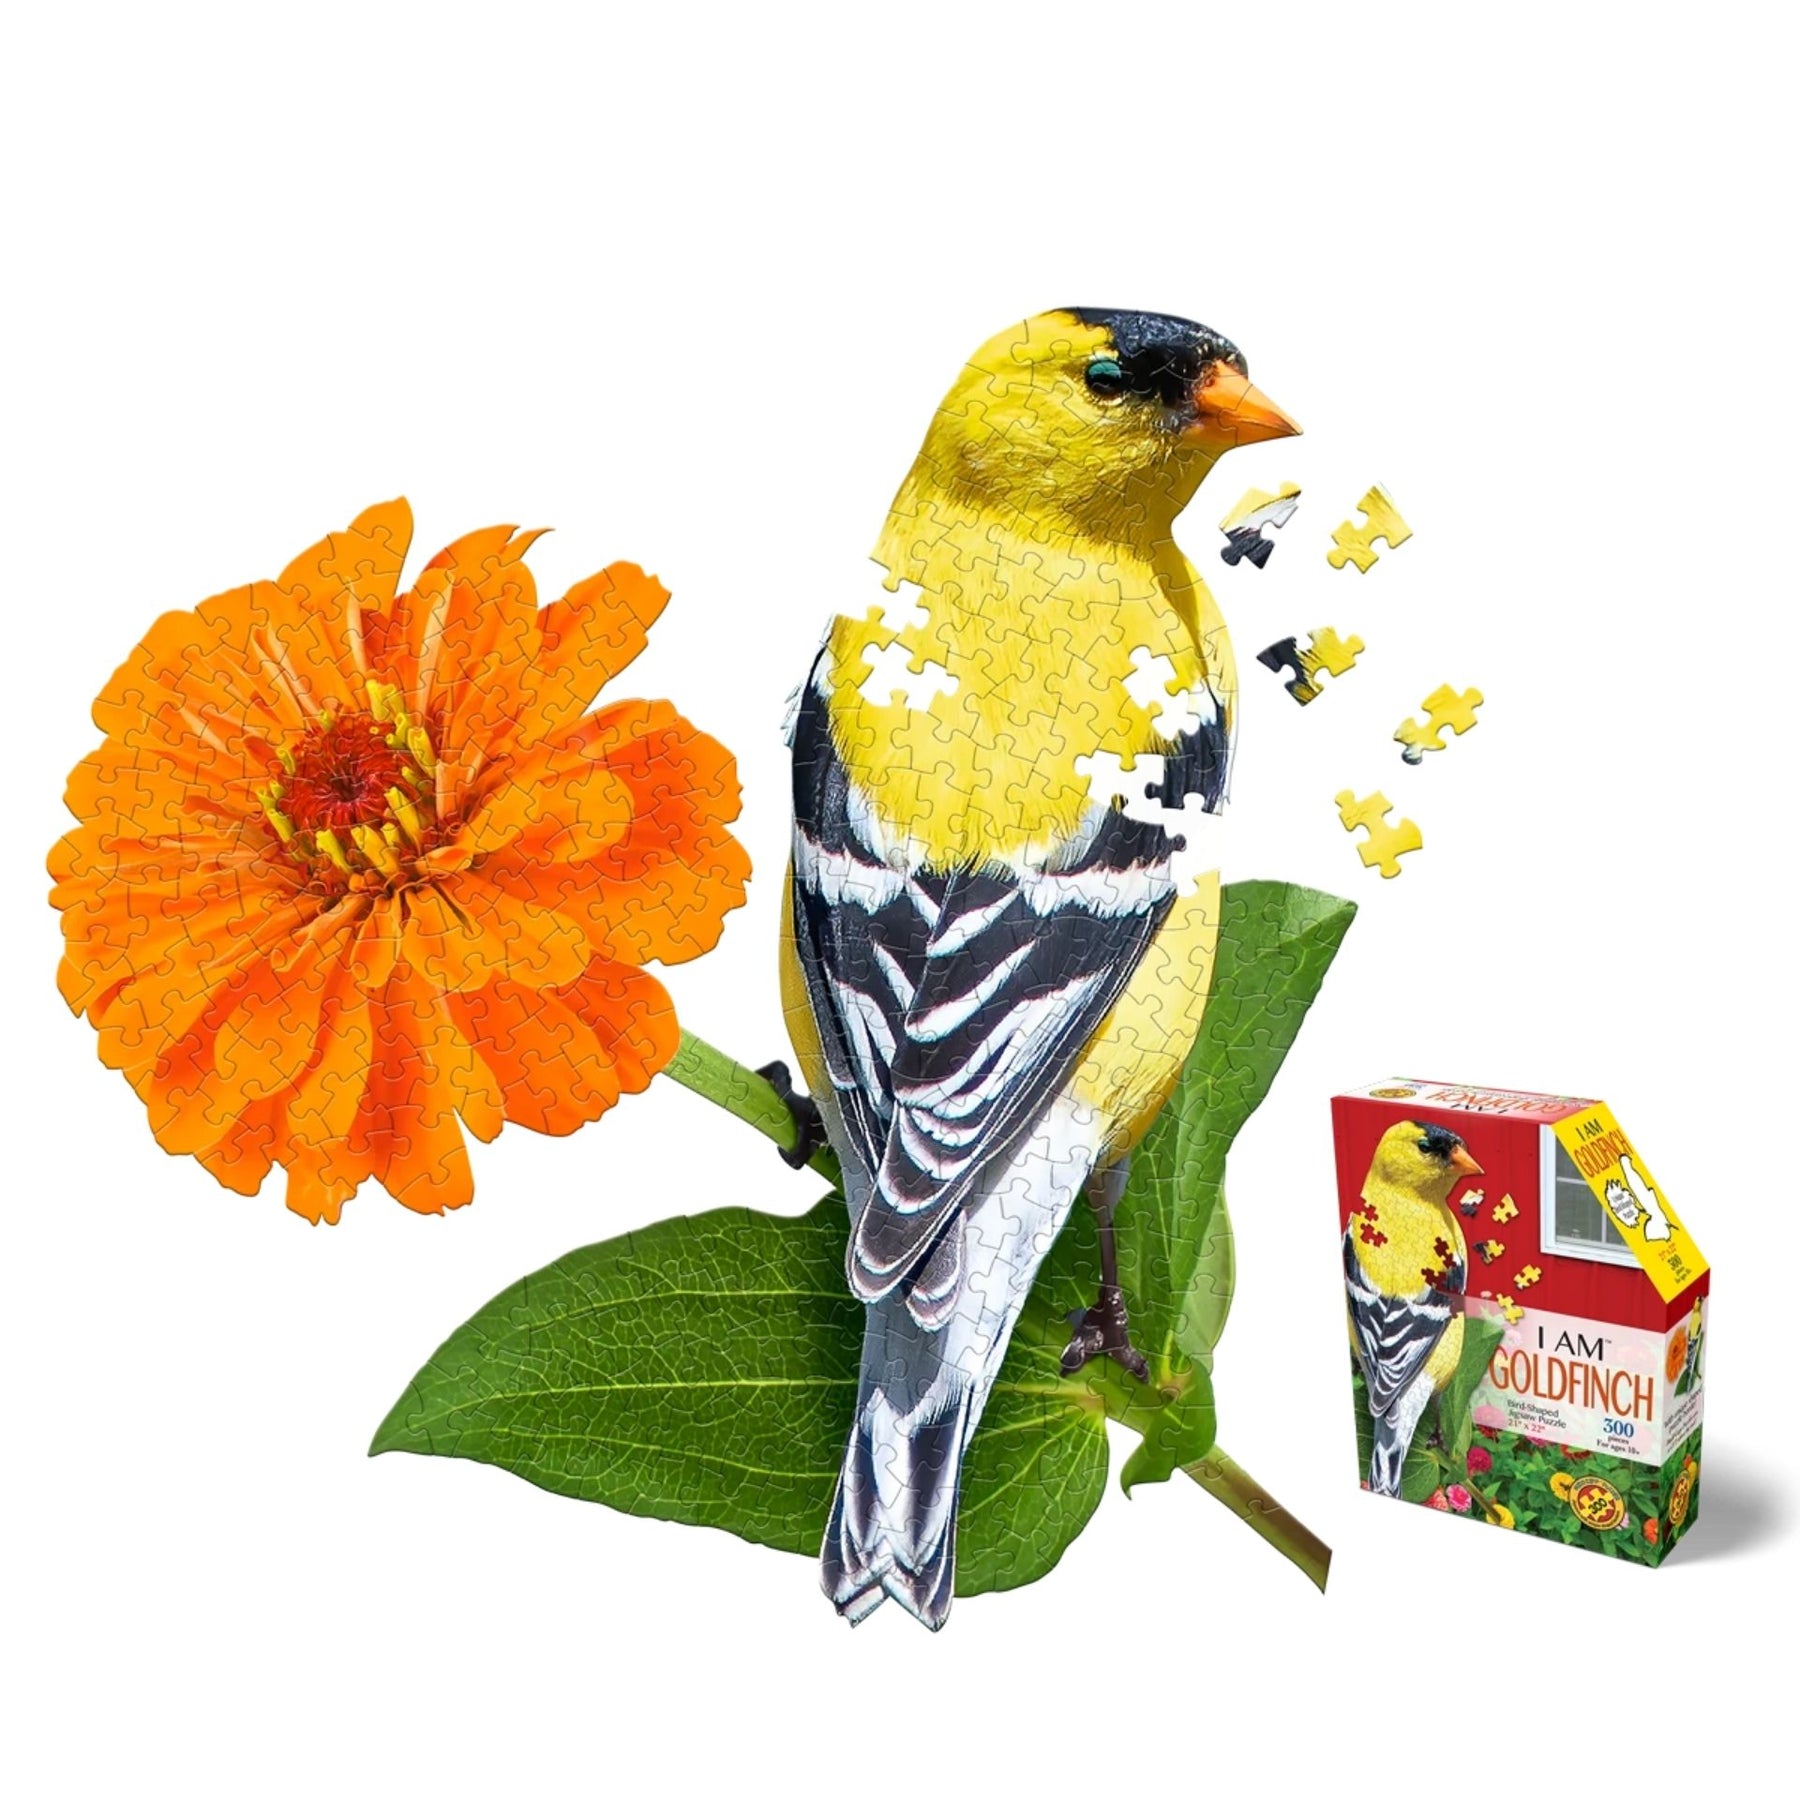 Madd Capp Puzzle: I AM GoldFinch-Southern Agriculture